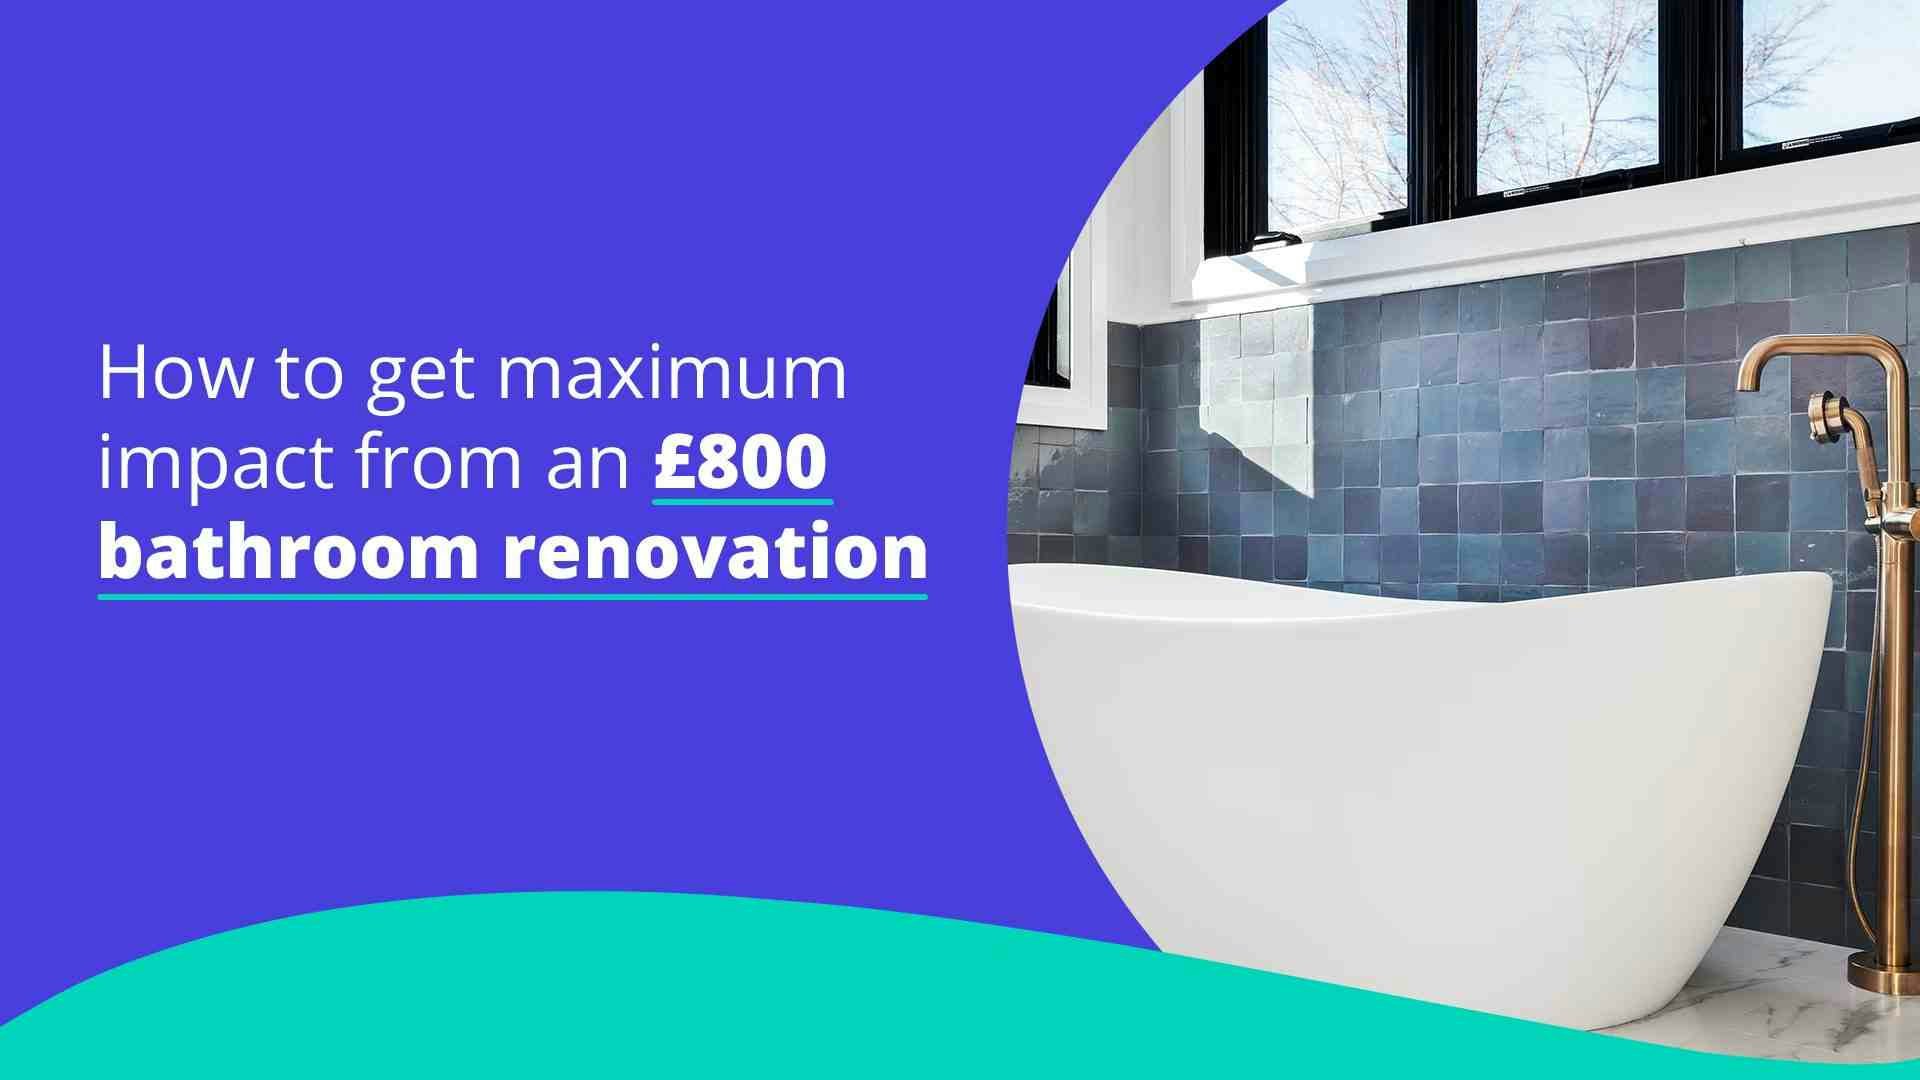 Featured image for How to get maximum impact from an £800 bathroom renovation